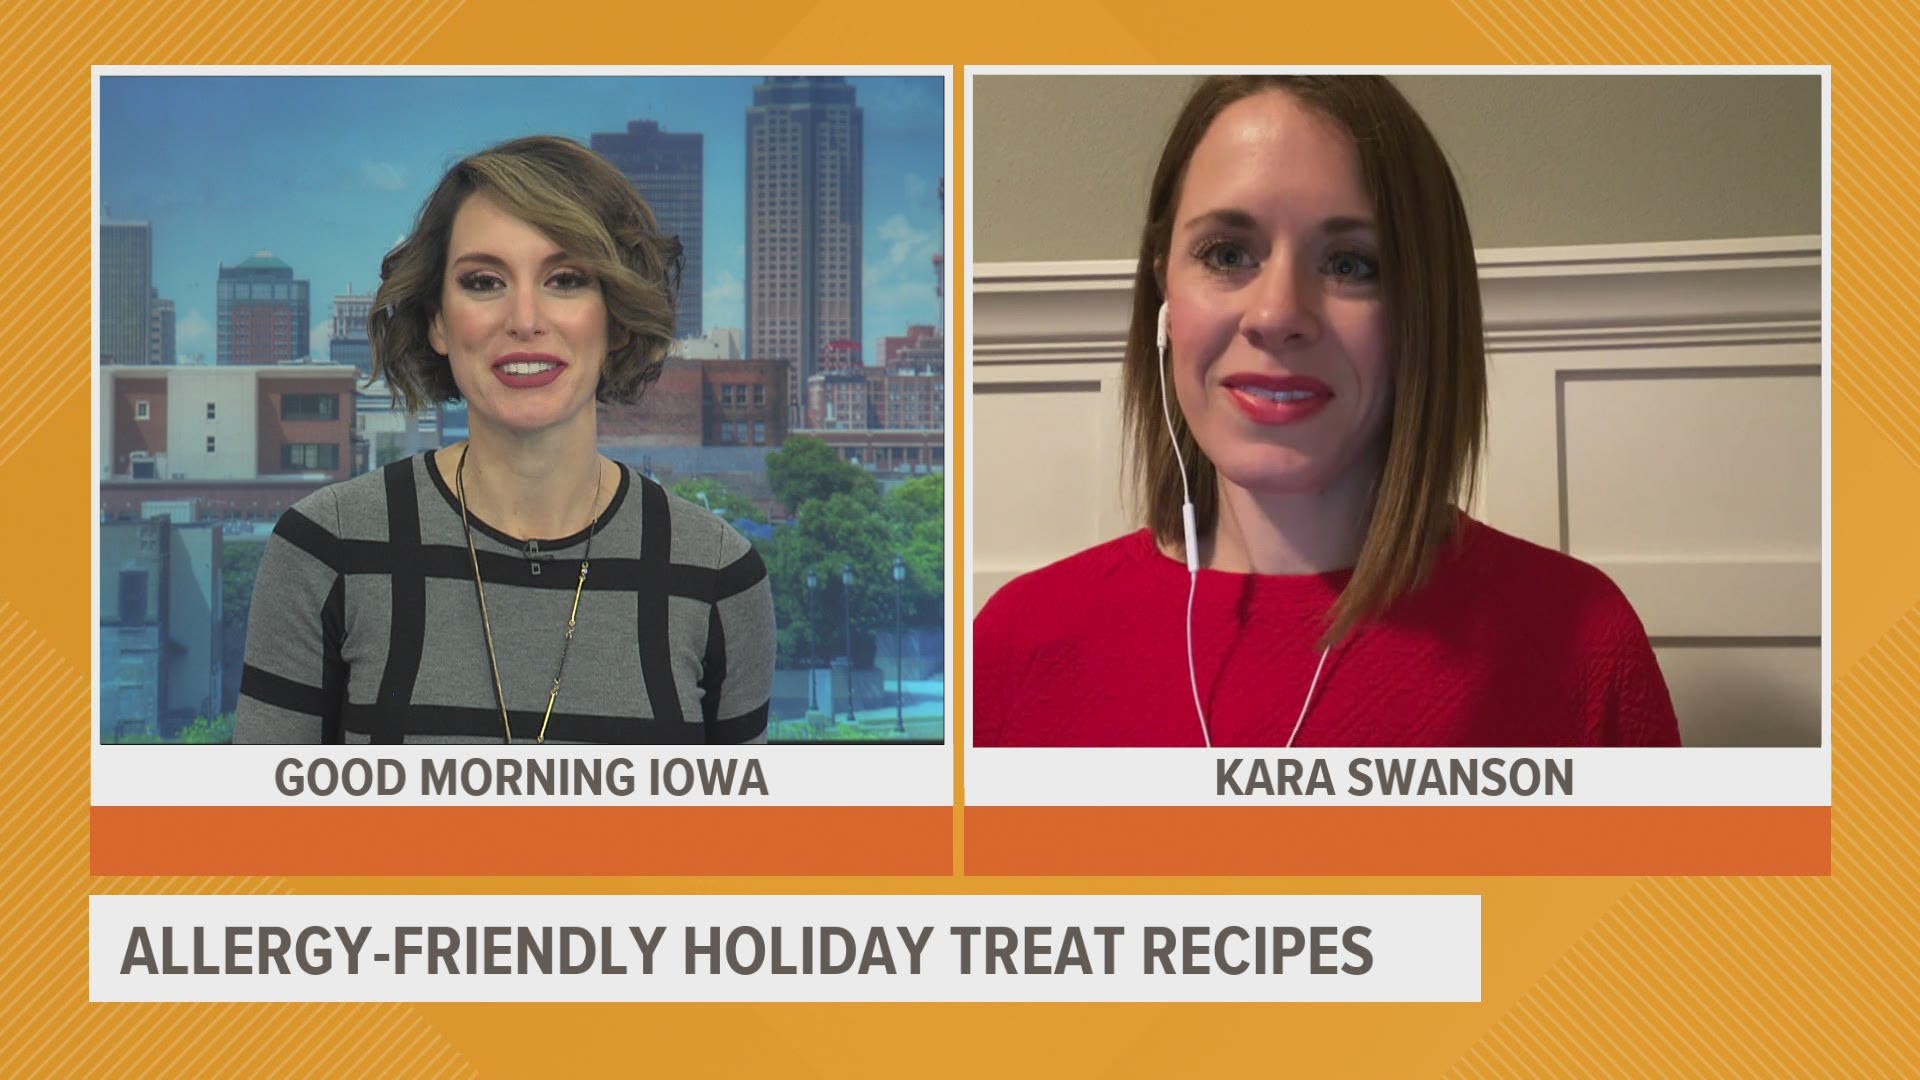 Kara Swanson with Life Well Lived shared three allergy-friendly holiday treat recipes you'll want to try.